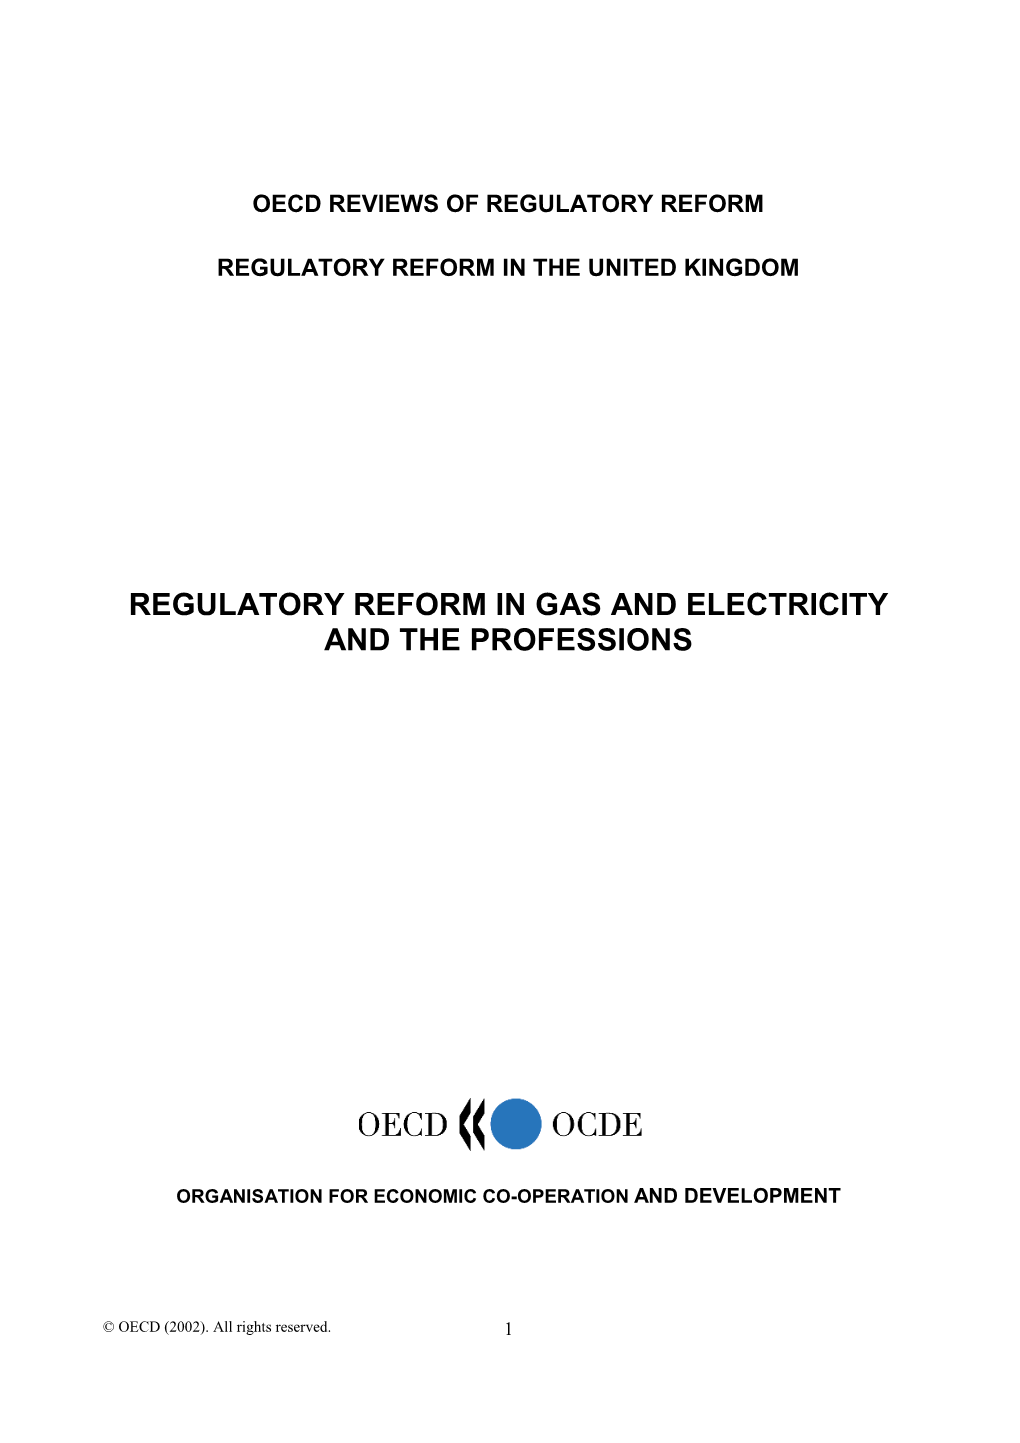 Regulatory Reform in Gas and Electricity and the Professions